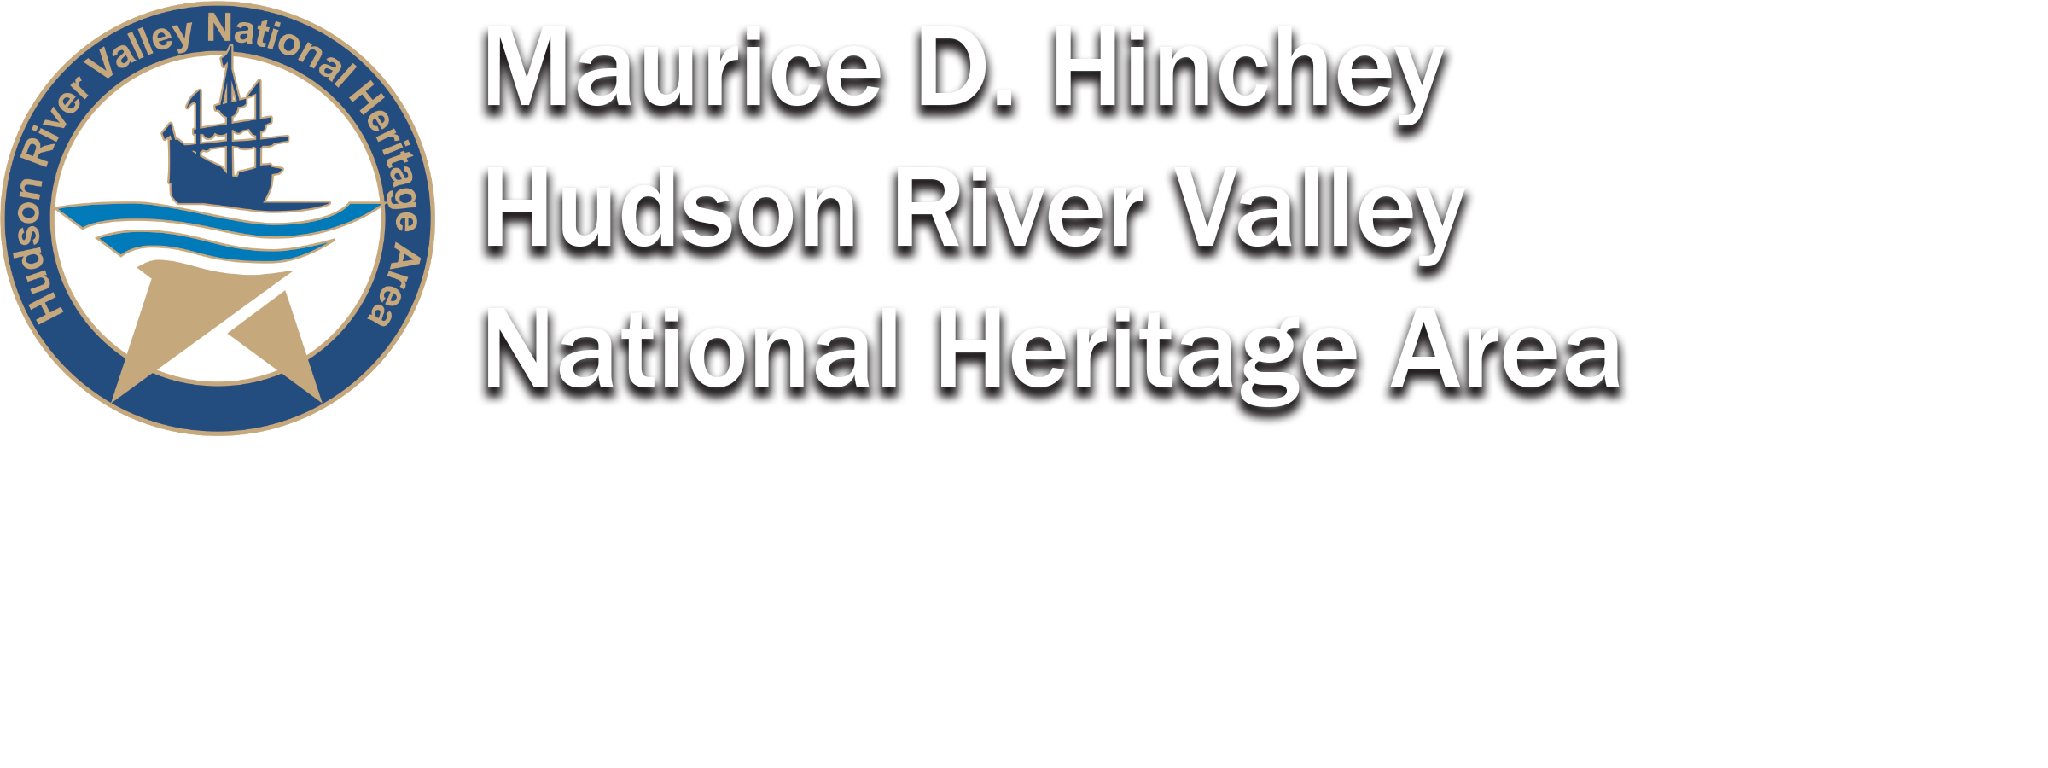 Maurice D. Hinchey Hudson River Valley National Heritage Area logo